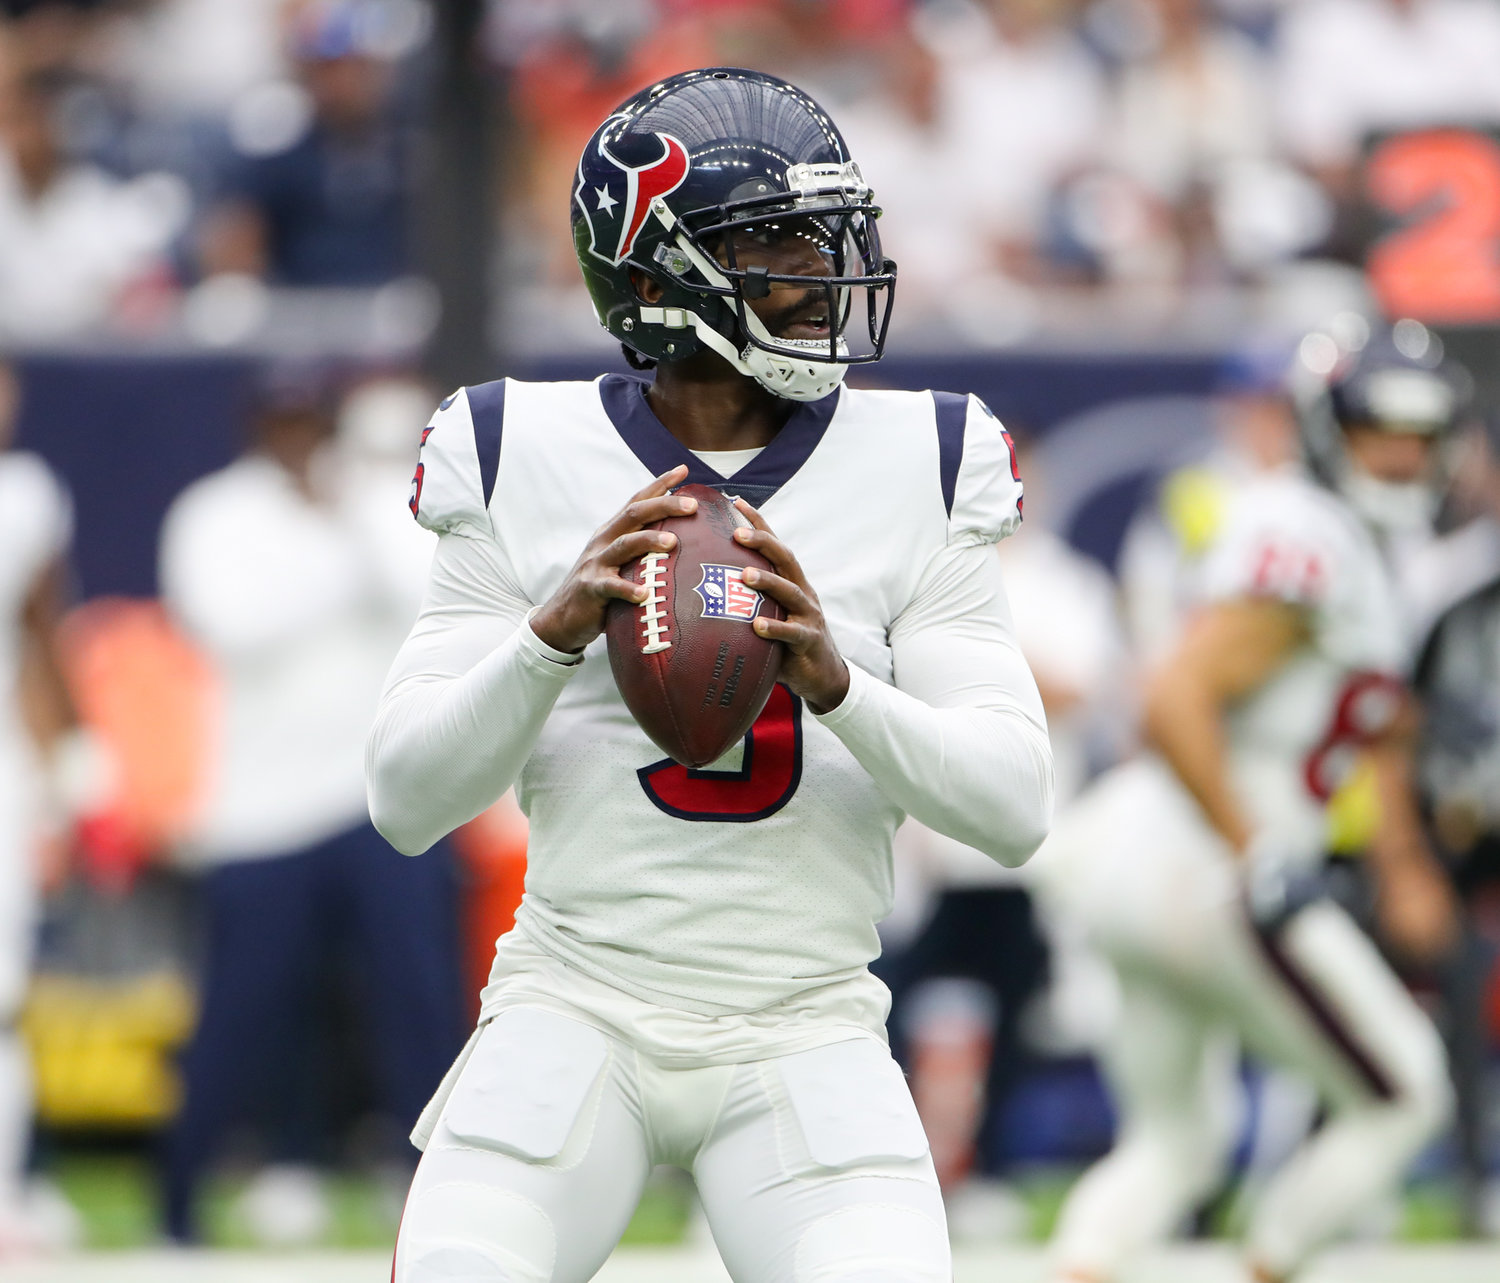 Houston Texans quarterback Tyrod Taylor (5) looks to pass during the first half of an NFL game between the Houston Texans and the Jacksonville Jaguars on September 12, 2021 in Houston, Texas.